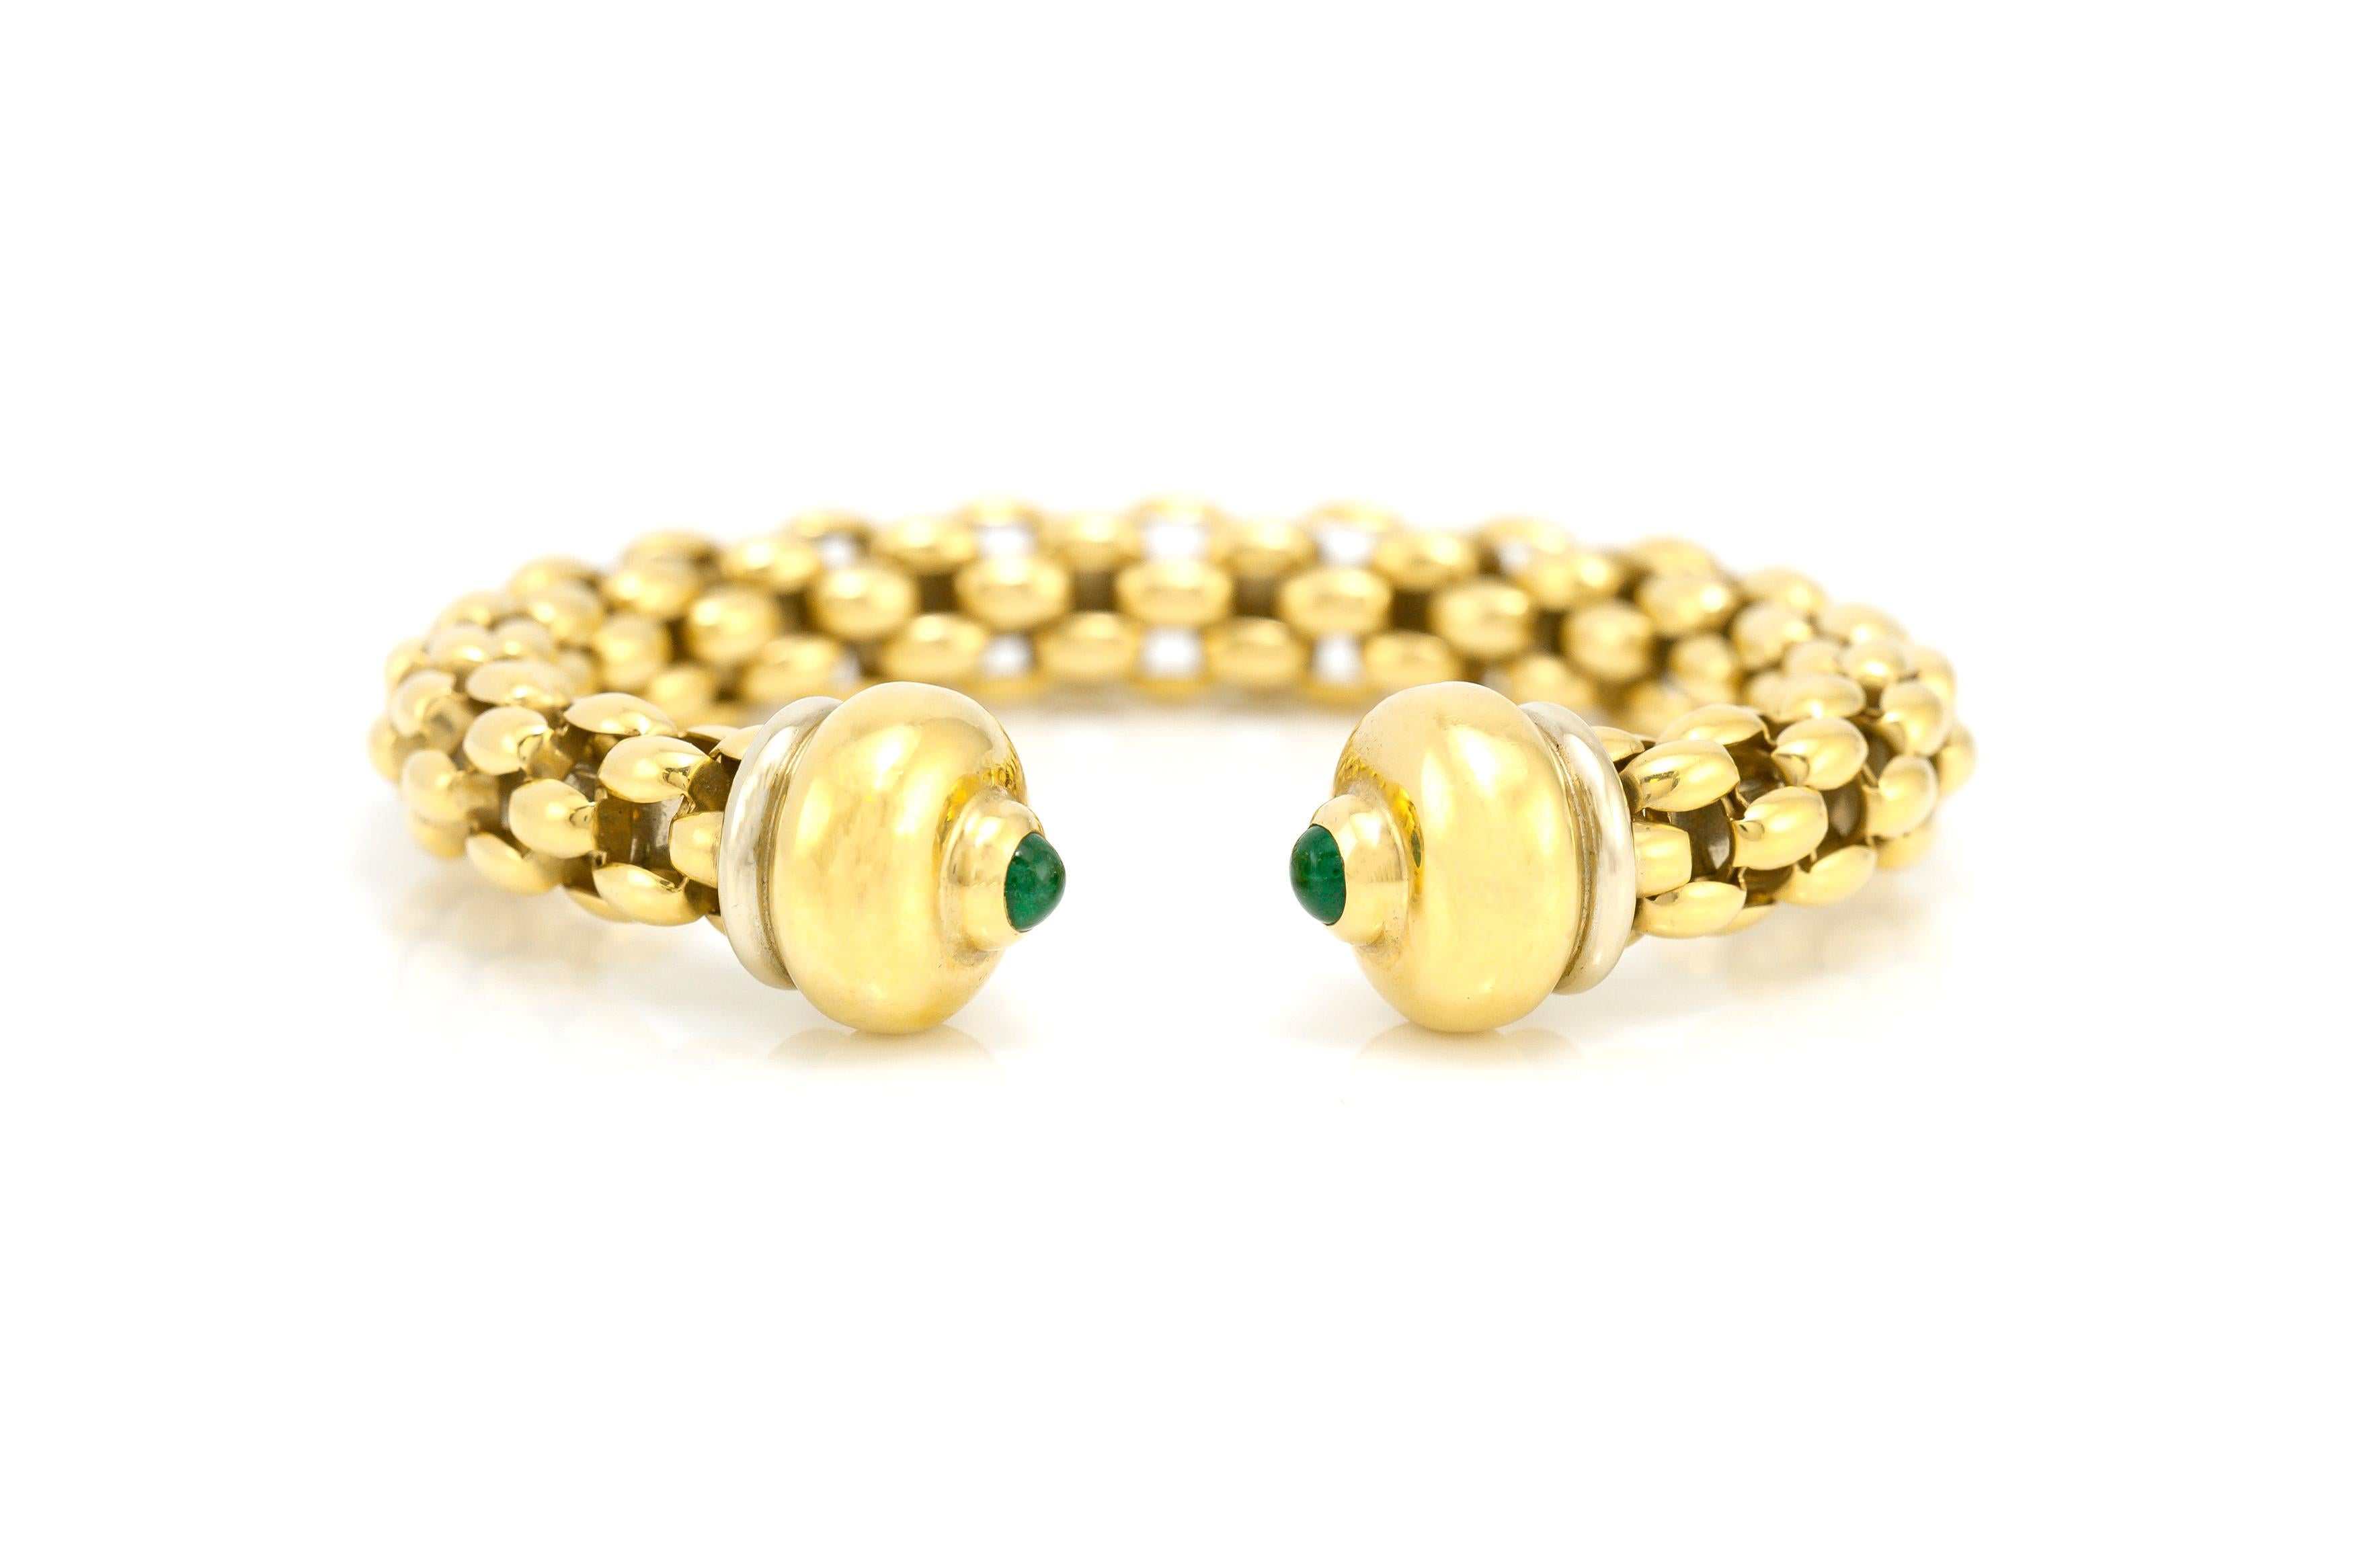 The bracelet is finely crafted in 18k yellow gold with two cabochon emeralds and the wighing approximaately is 33.3 dwt.